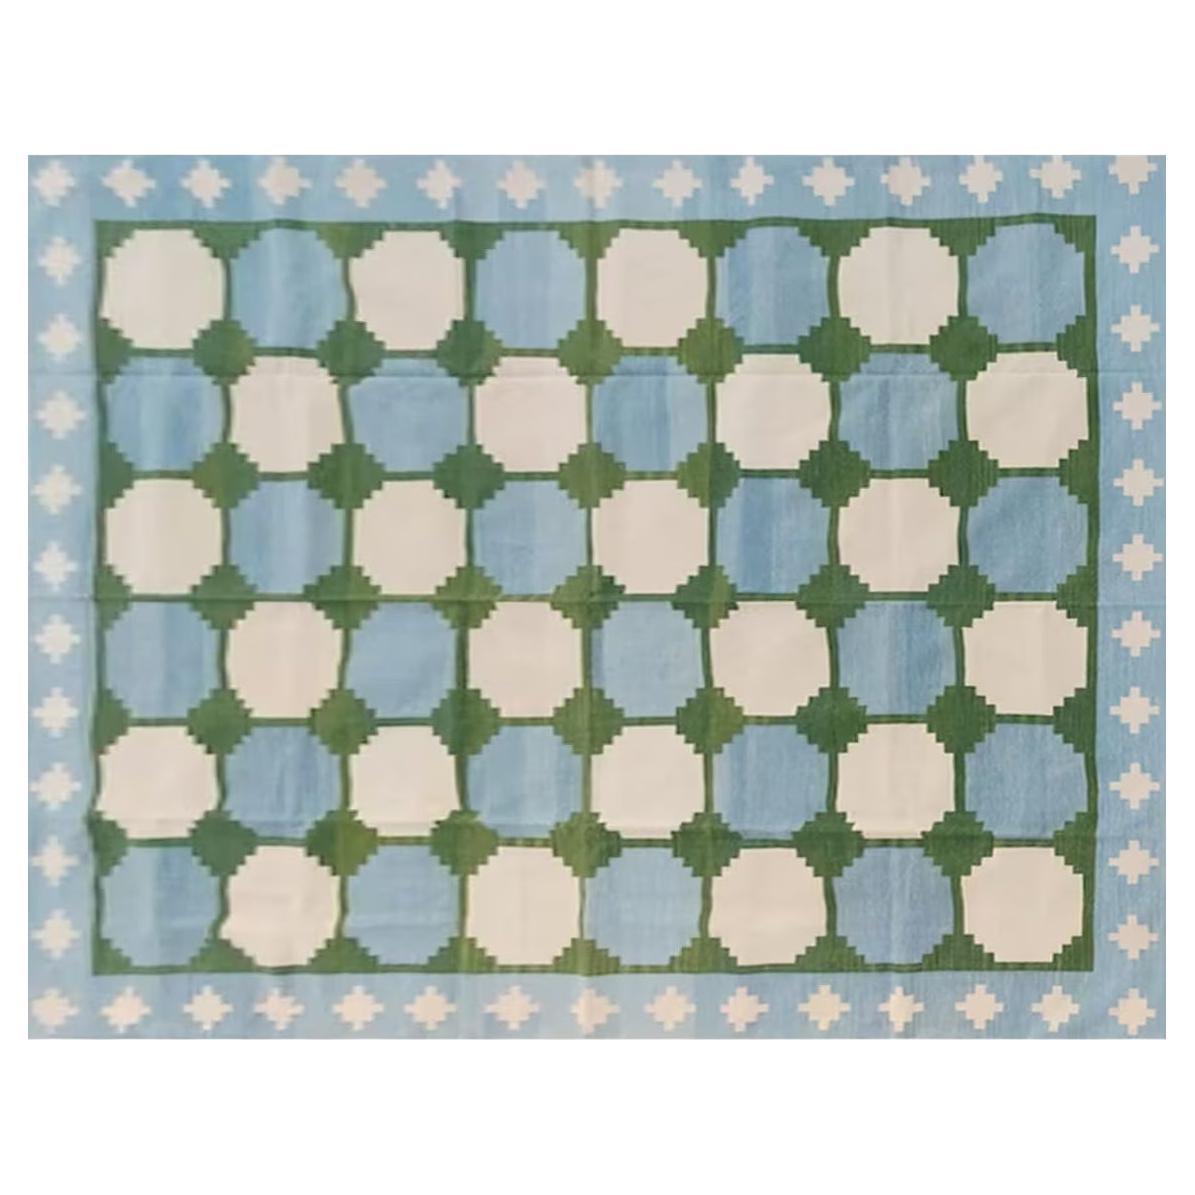 Handmade Cotton Area Flat Weave Rug, Green & Blue Tile Patterned Indian Dhurrie For Sale